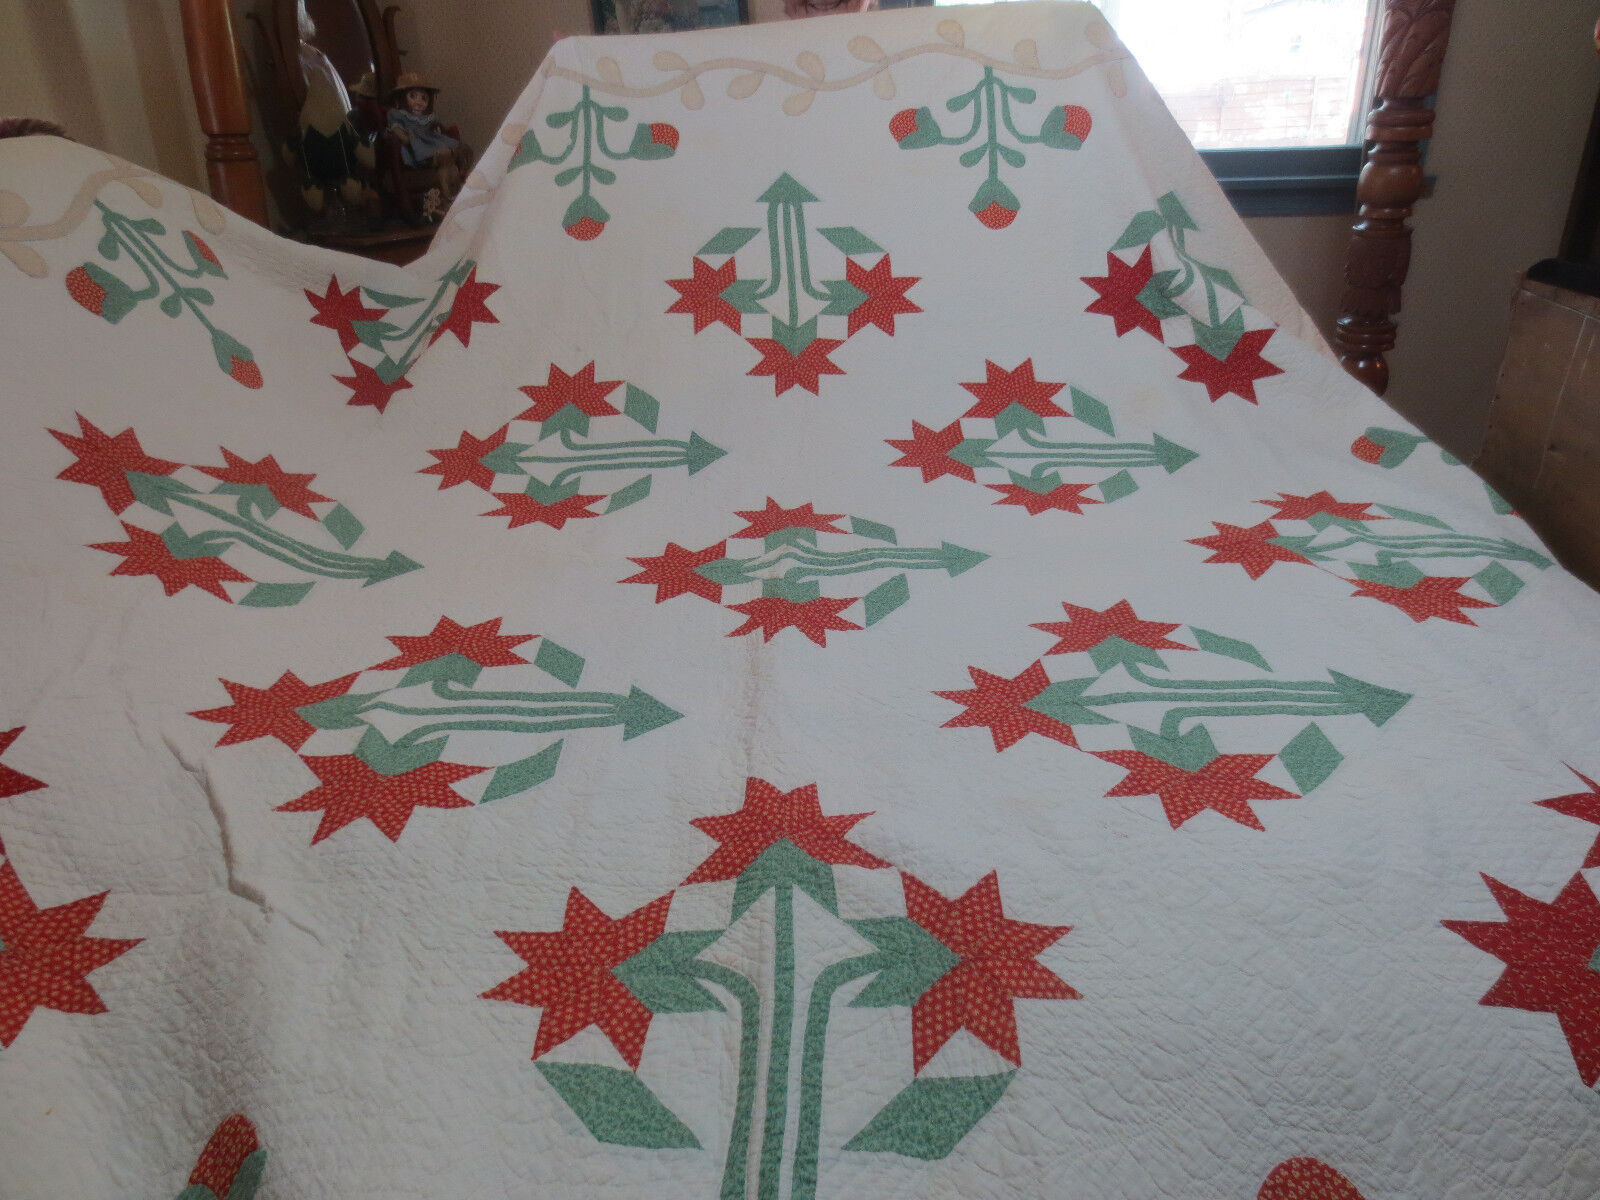 OUTSTANDING HAND STITCHED APPLIQUE QUILT IN CAROLINA LILY & POMEGRANITE PATTERN